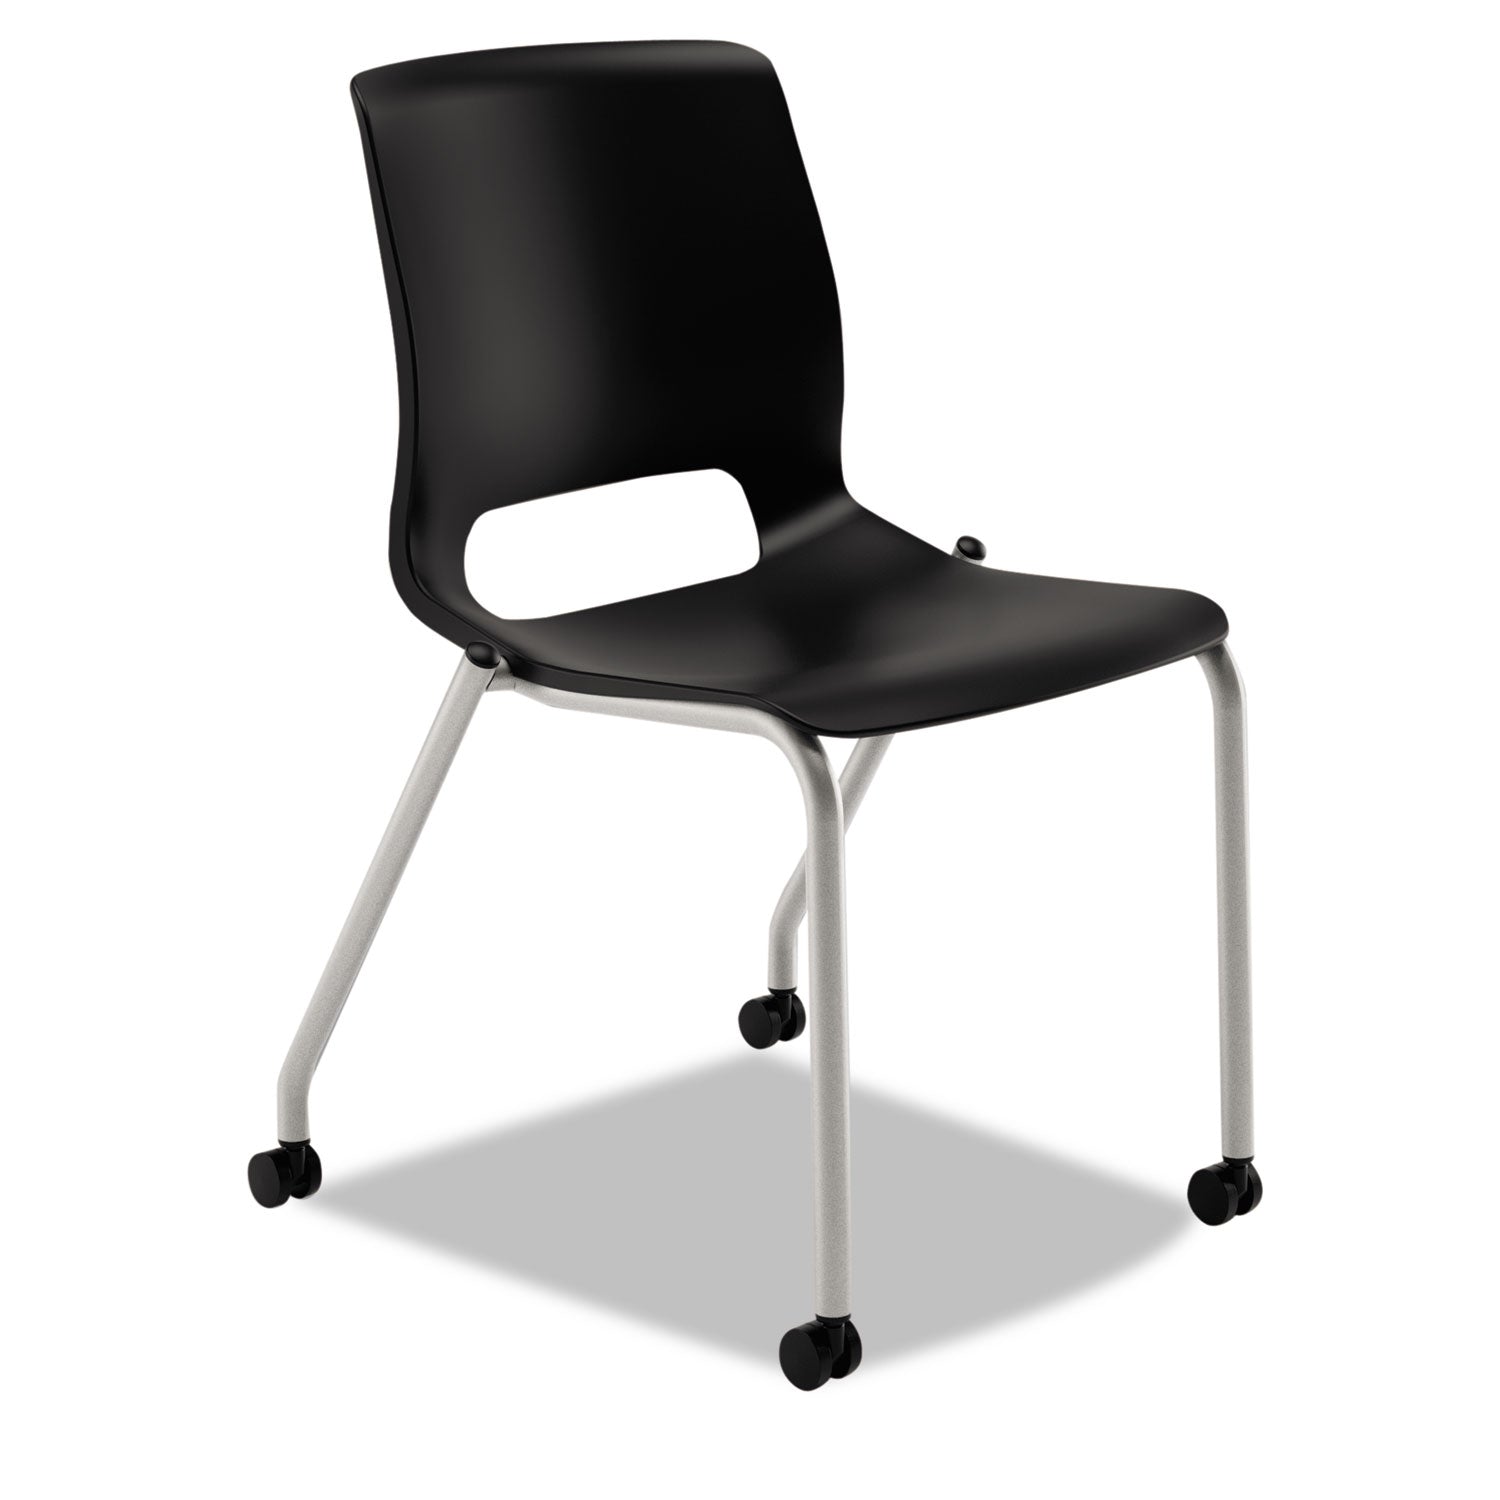 Motivate Four-Leg Stacking Chair, Supports 300 lb, 18.25" Seat Height, Onyx Fabric Seat, Black Back, Platinum Base, 2/Carton - 